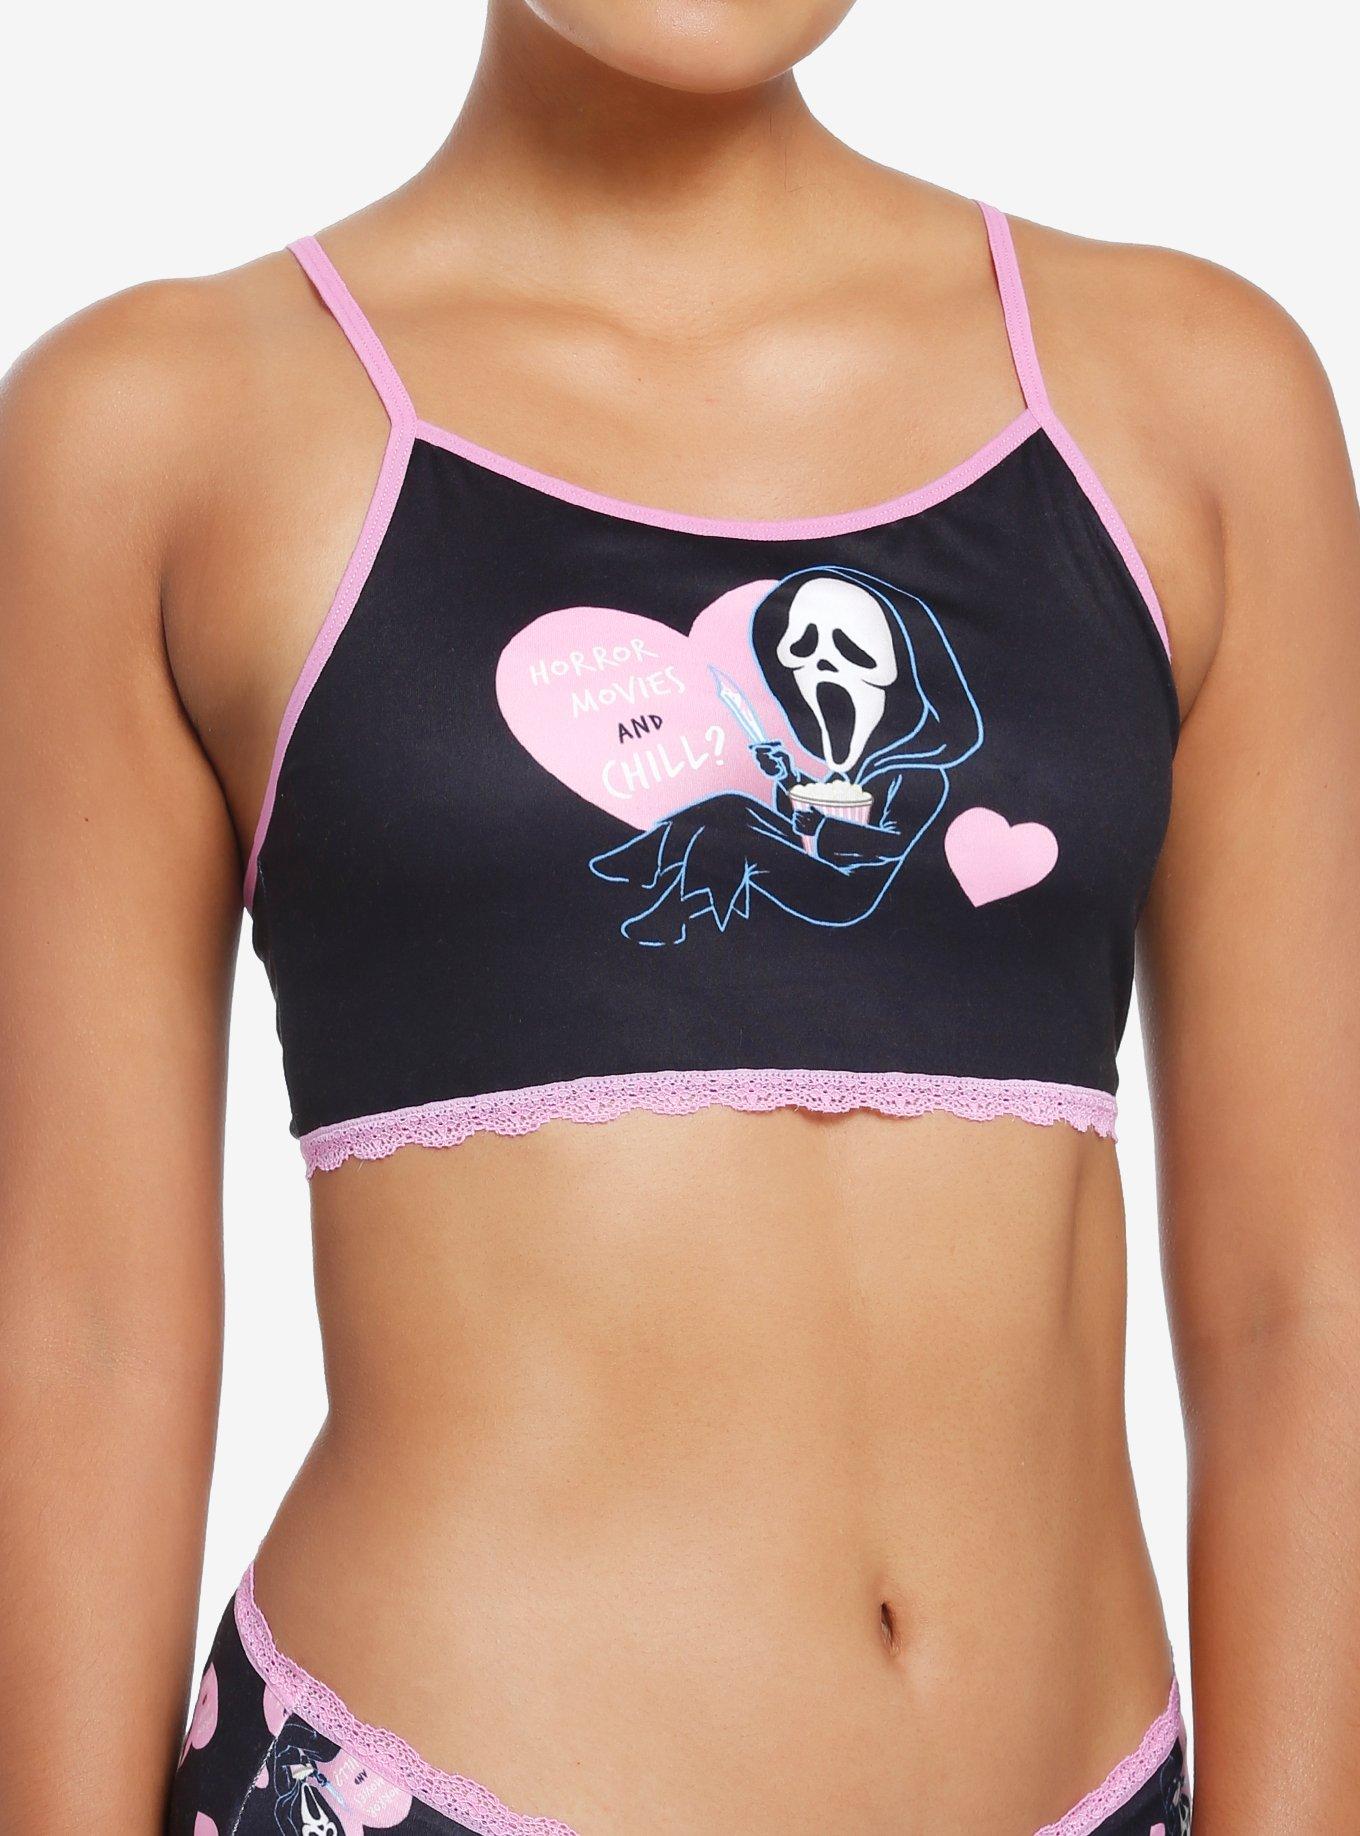 A bra so chill you can wear it w your pjs (also Negative, in case